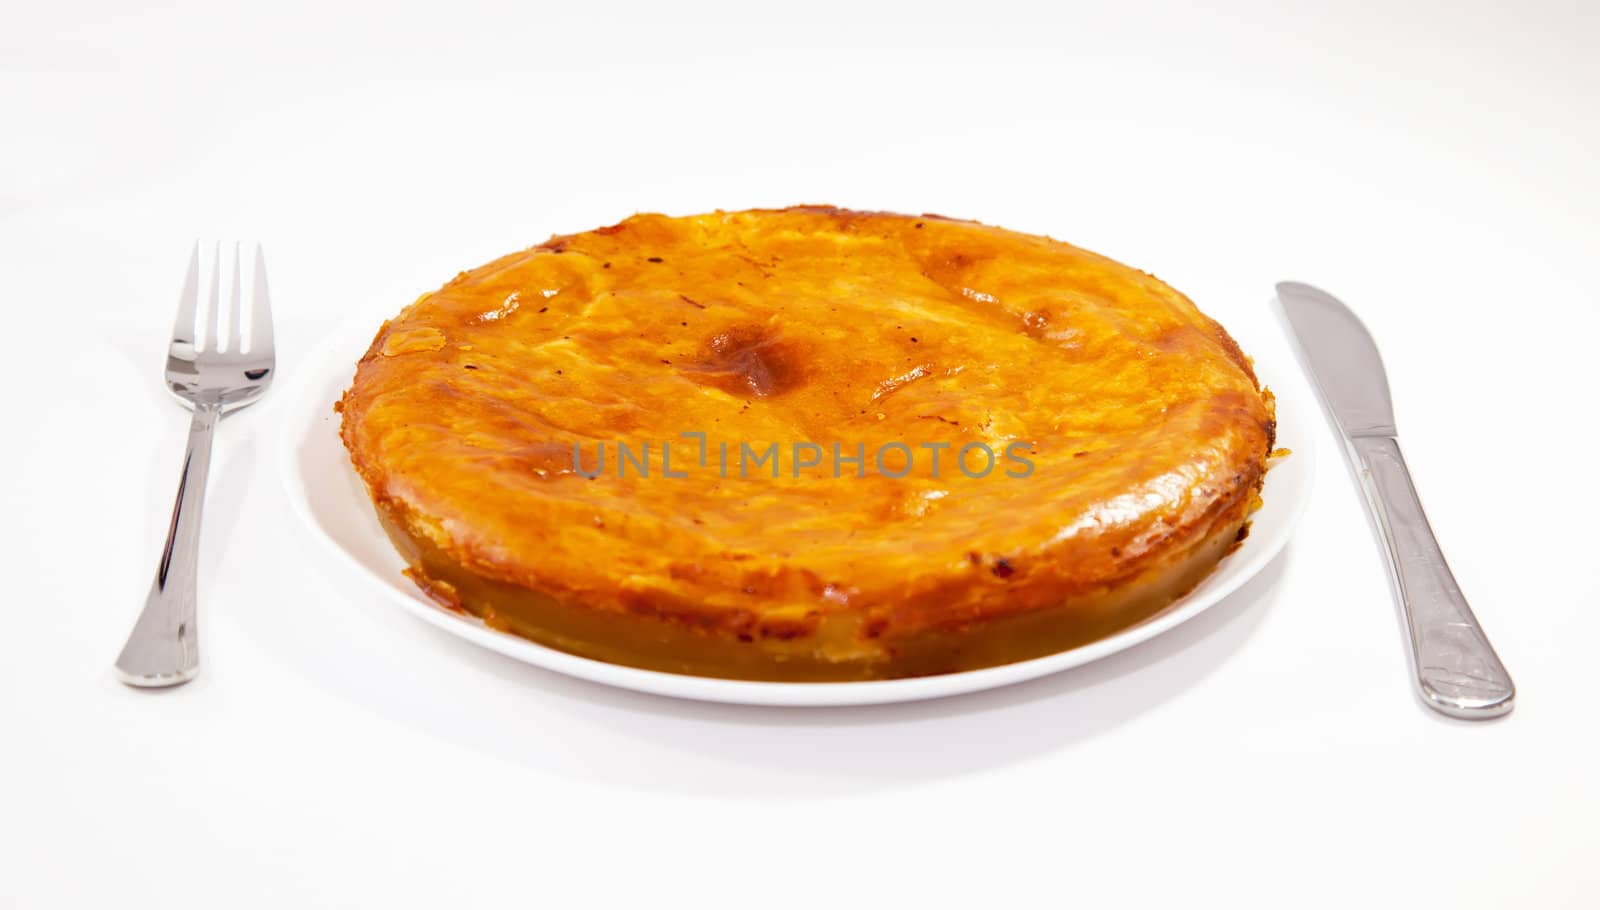 Onion and cheese pie with fork and knife